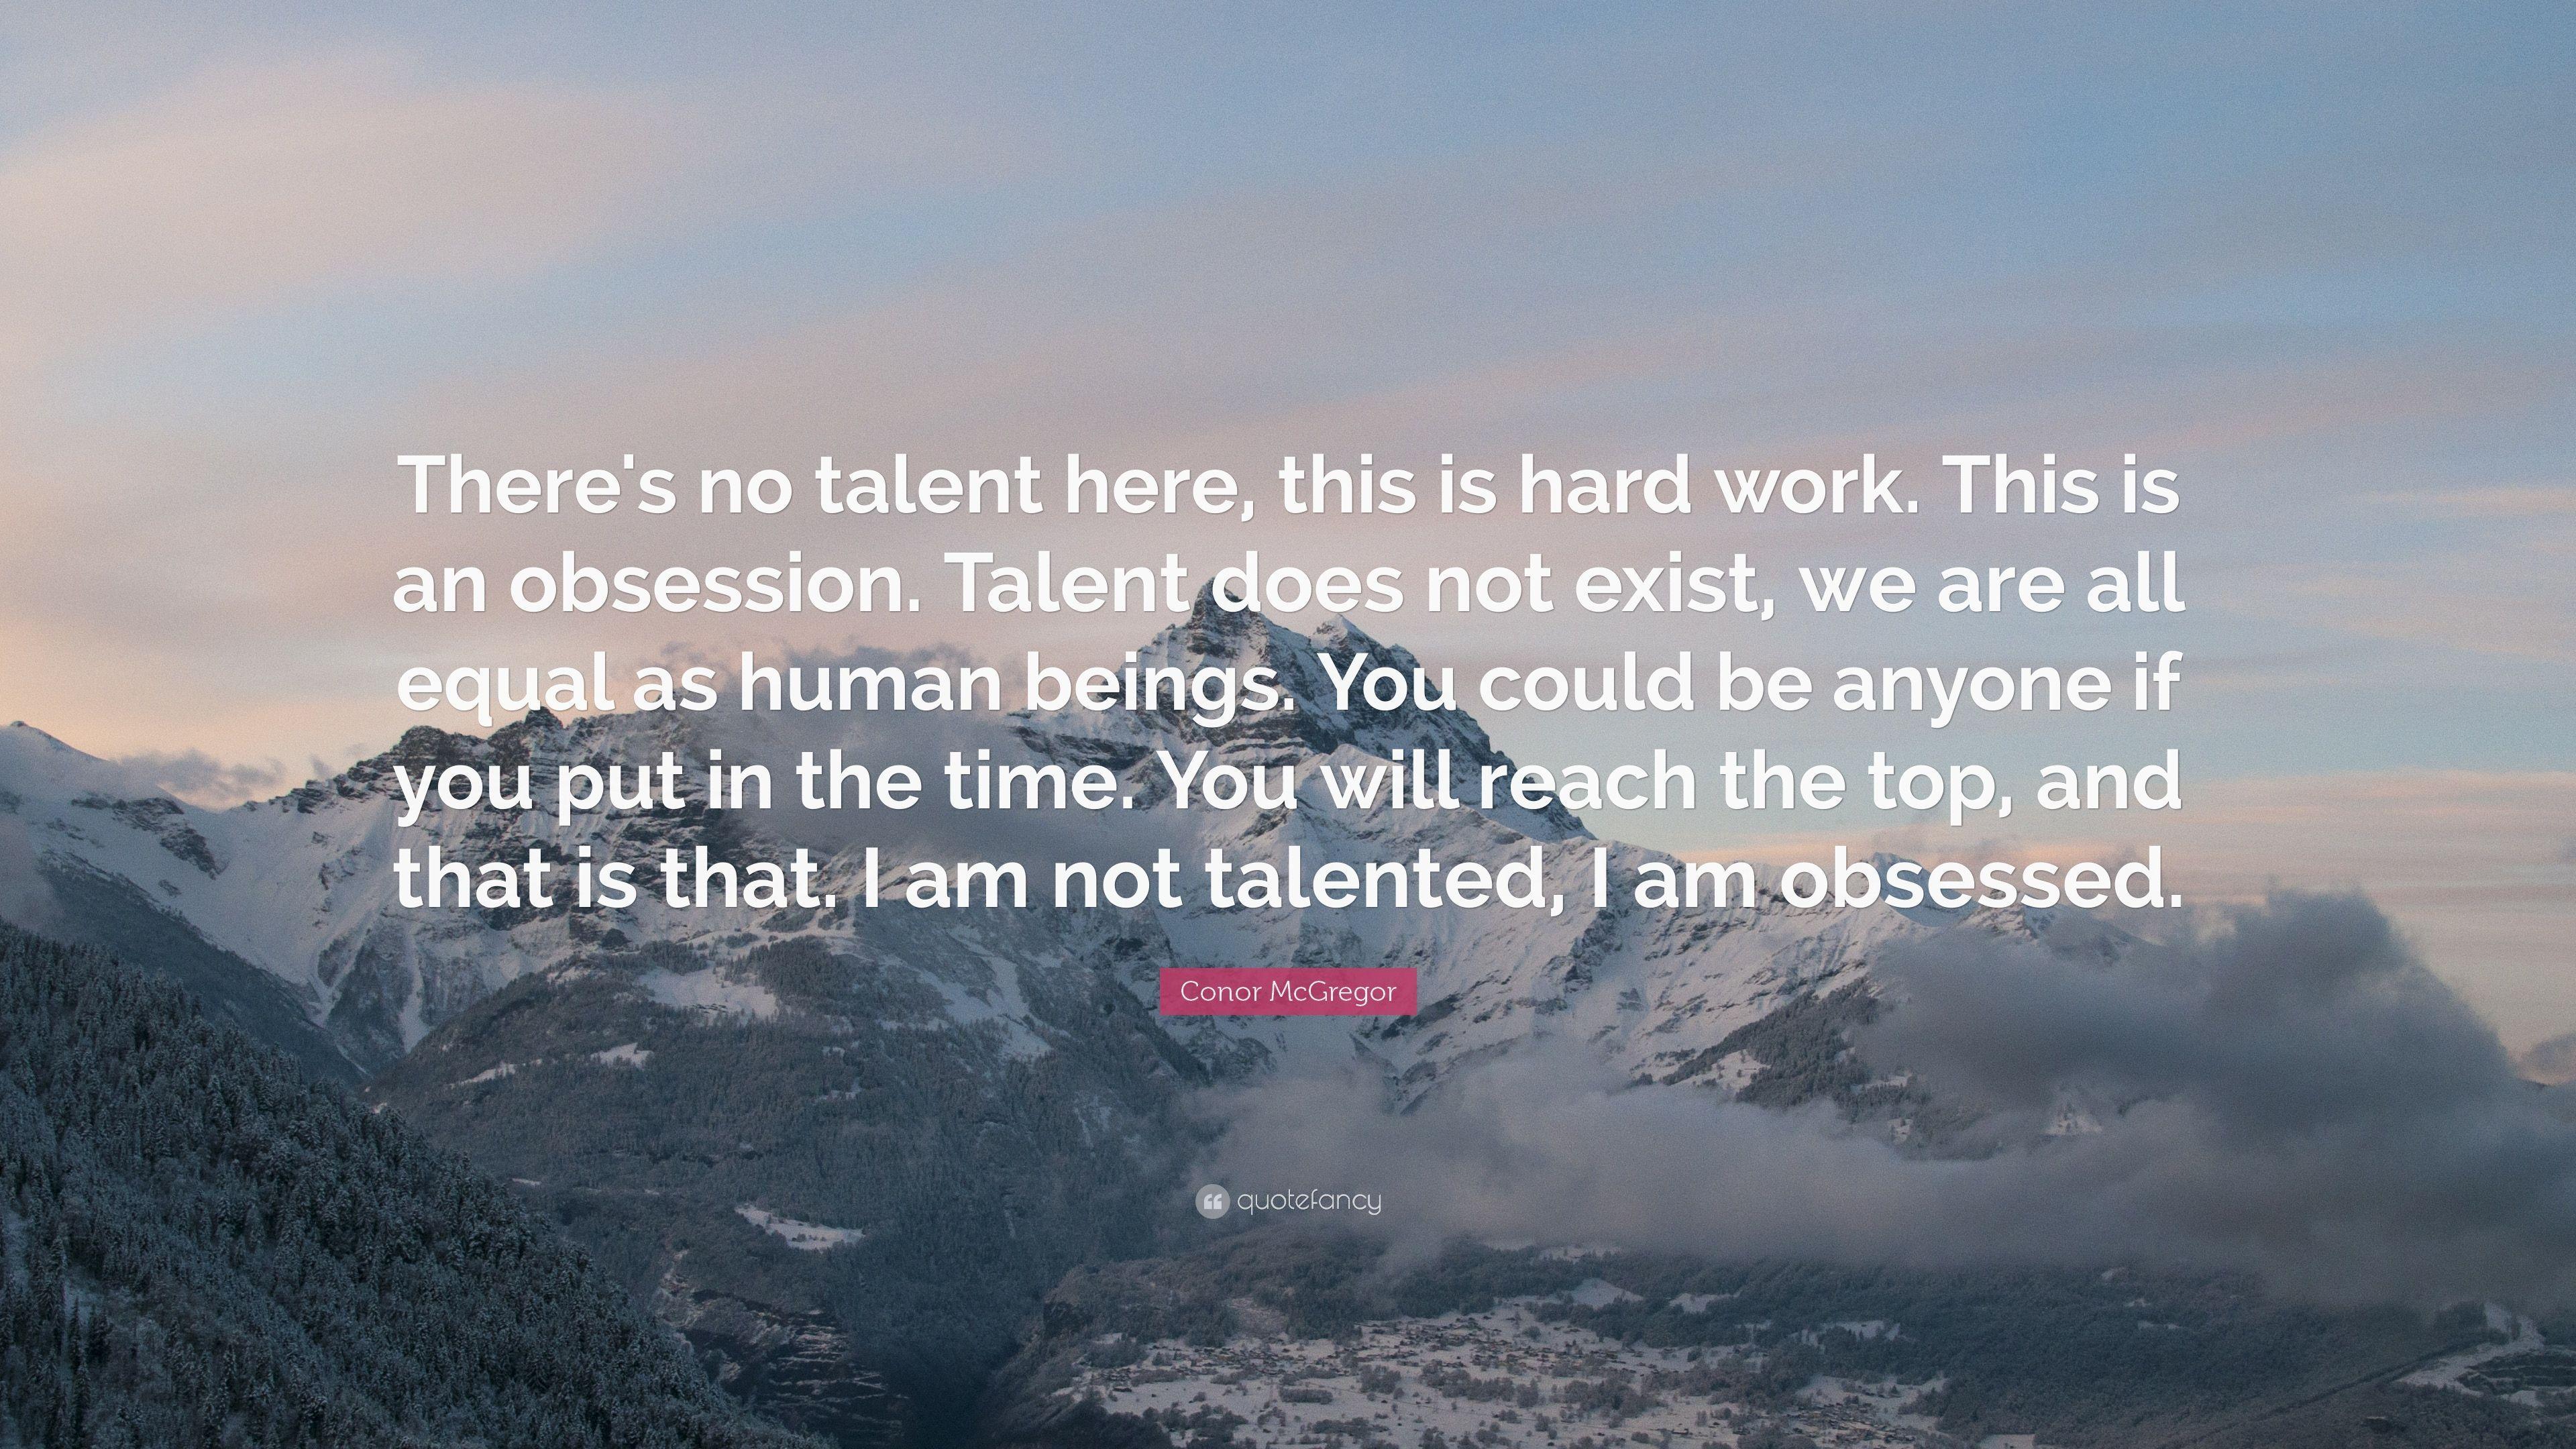 Conor McGregor Quote: “There's no talent here, this is hard work